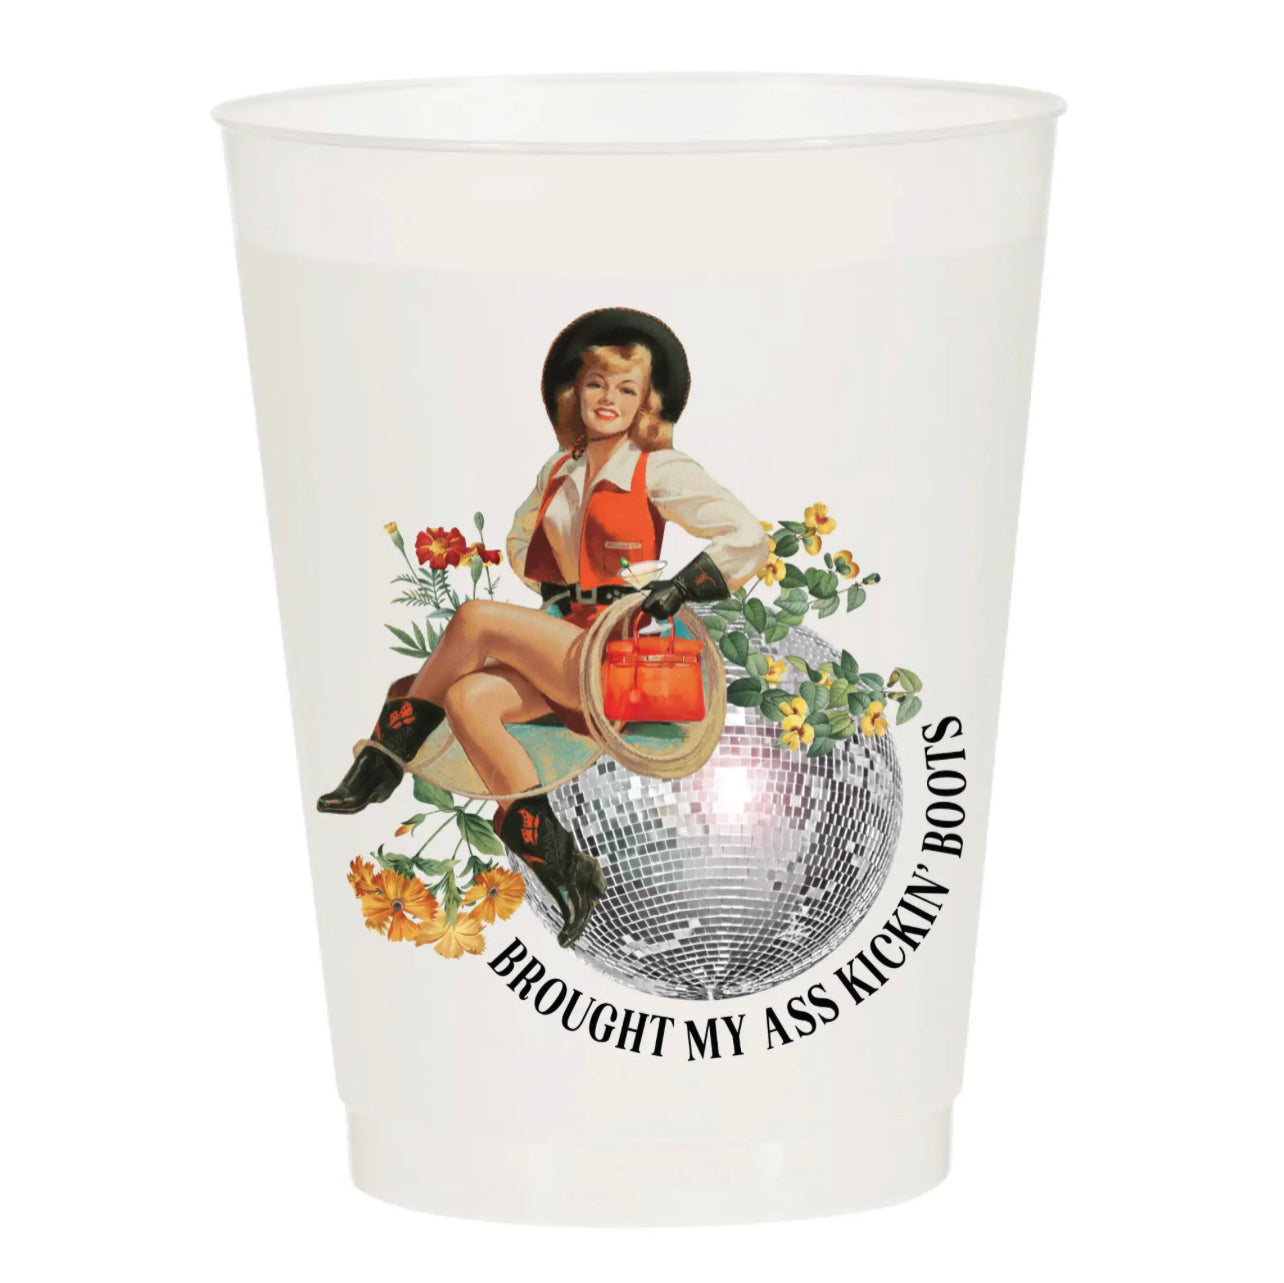 frosted plastic cup featuring a nostalgic rodeo cowgirl posed on a disco ball with the phrase underneath "brought my ass kickin' boots"